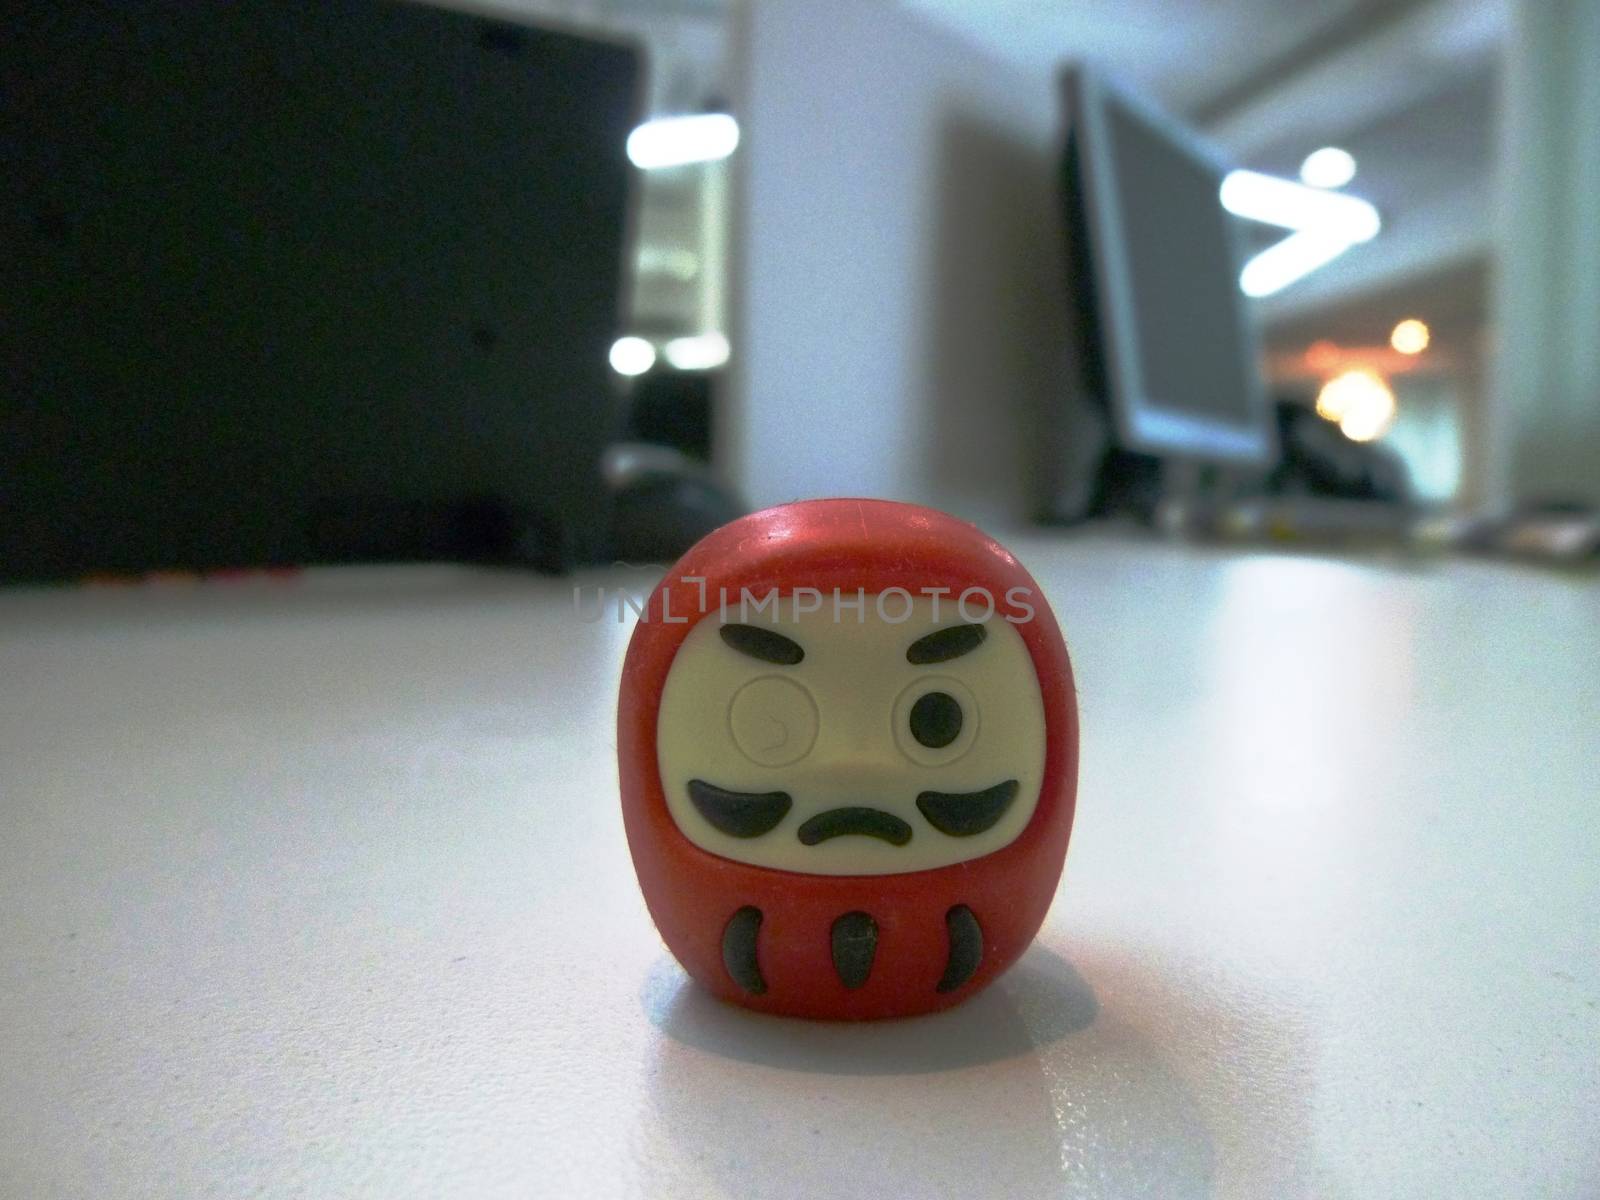 The prayer rubber of Red Janpanese doll Daruma on the table